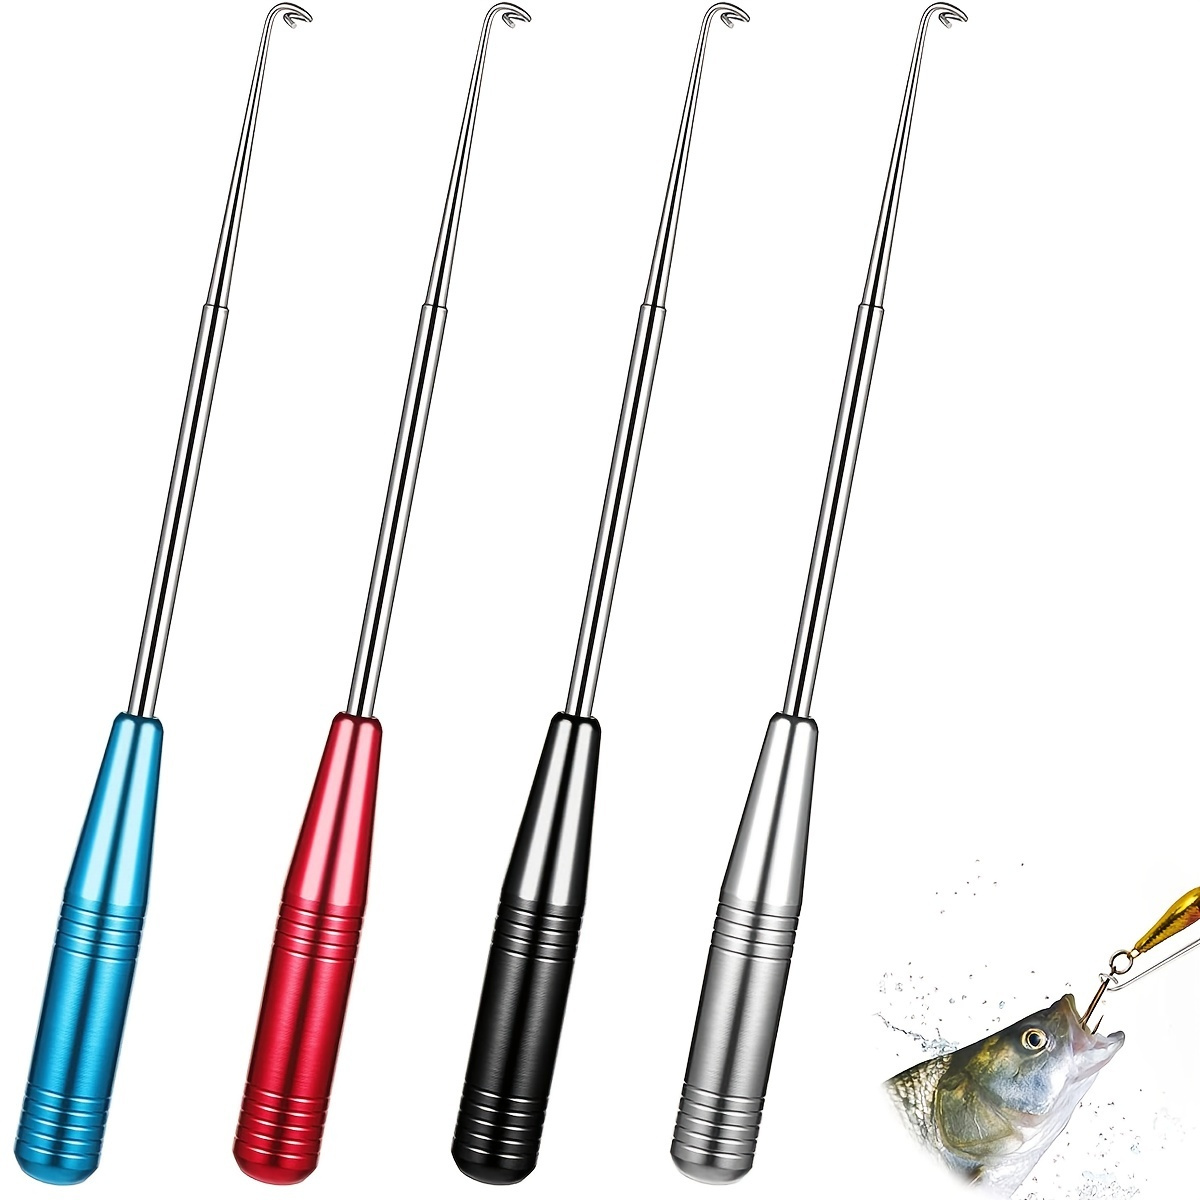 Tiwerlfe 4PCS Fishing Hook Quick Removal Device Stainless Steel Fishing Hook  Detacher Fish Hook Remover Tool Kit Accessory for Fishing Saltwater  Freshwater Decoupling Device 4 Colors, Hooks -  Canada